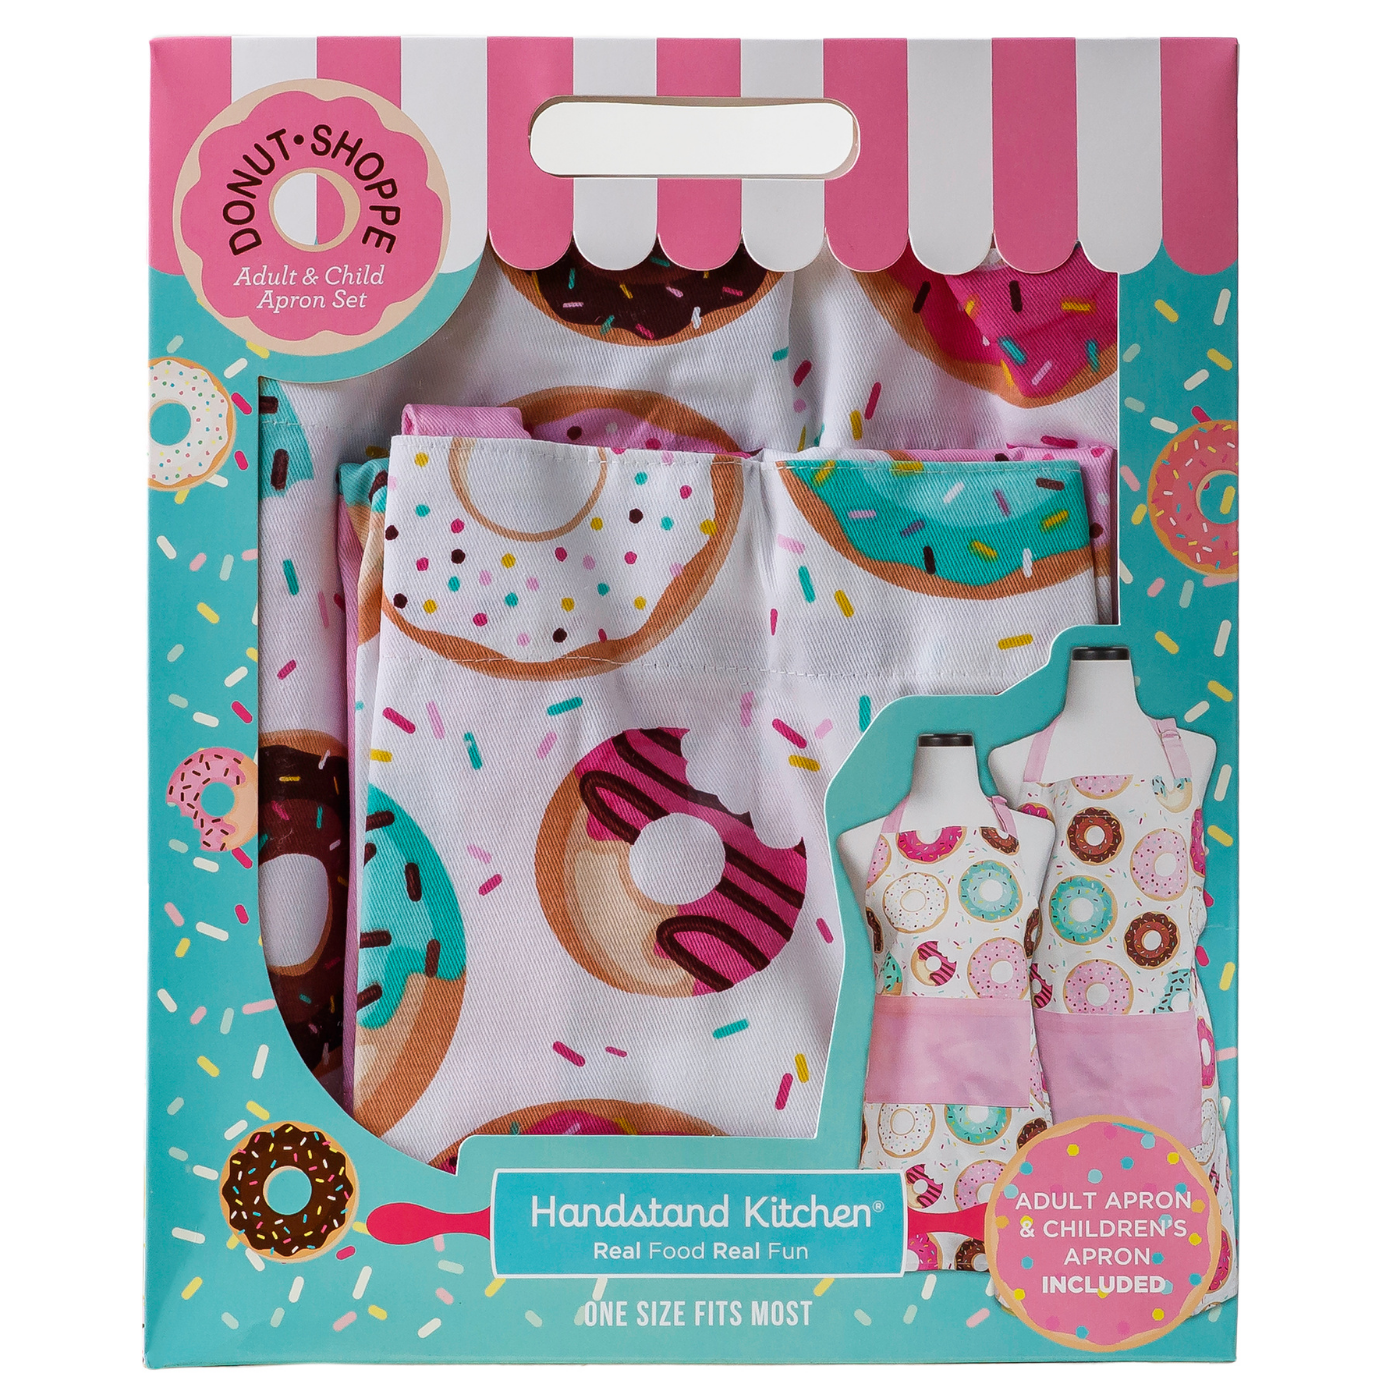 In box image of Donut Shoppe Adult and Youth Apron Boxed Set